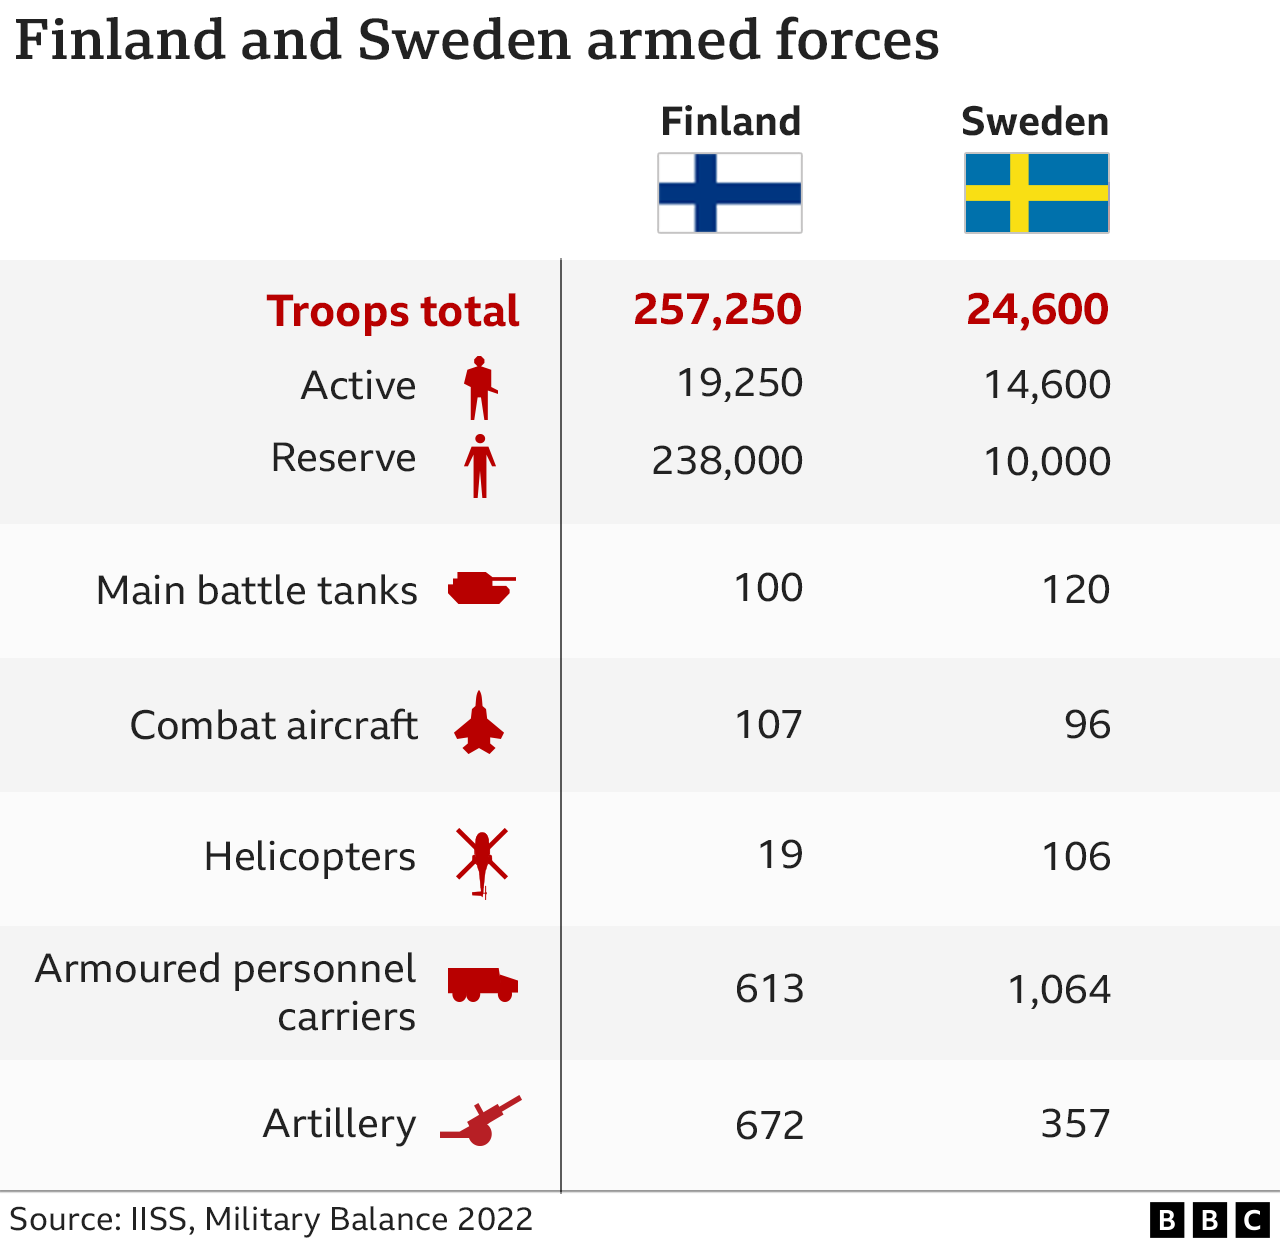 Graphic showing Finland and Sweden's armed forces